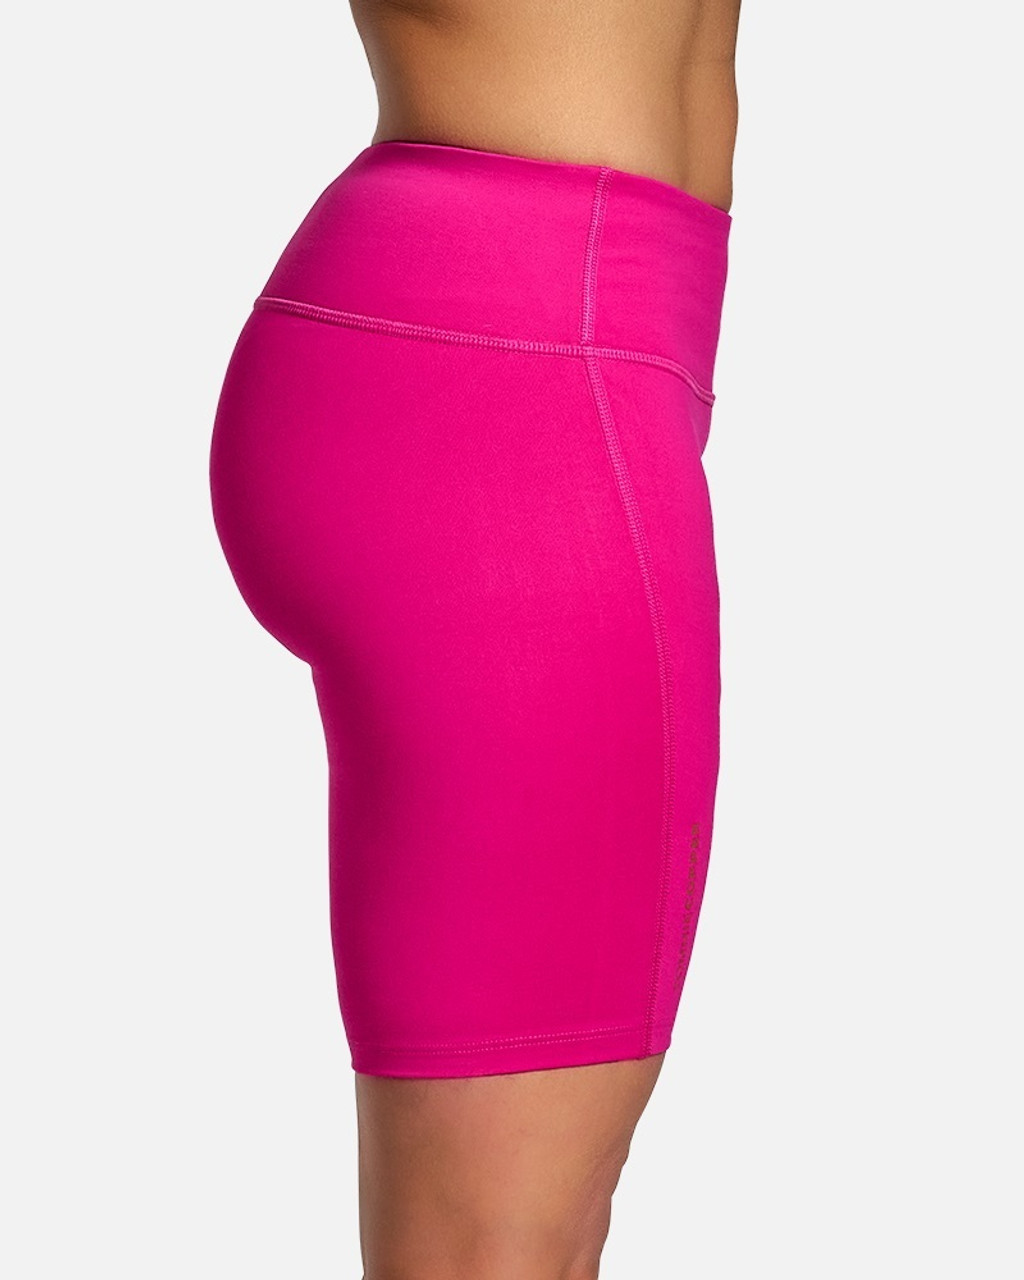 High-Waisted Compression Shorts, Ease Pain